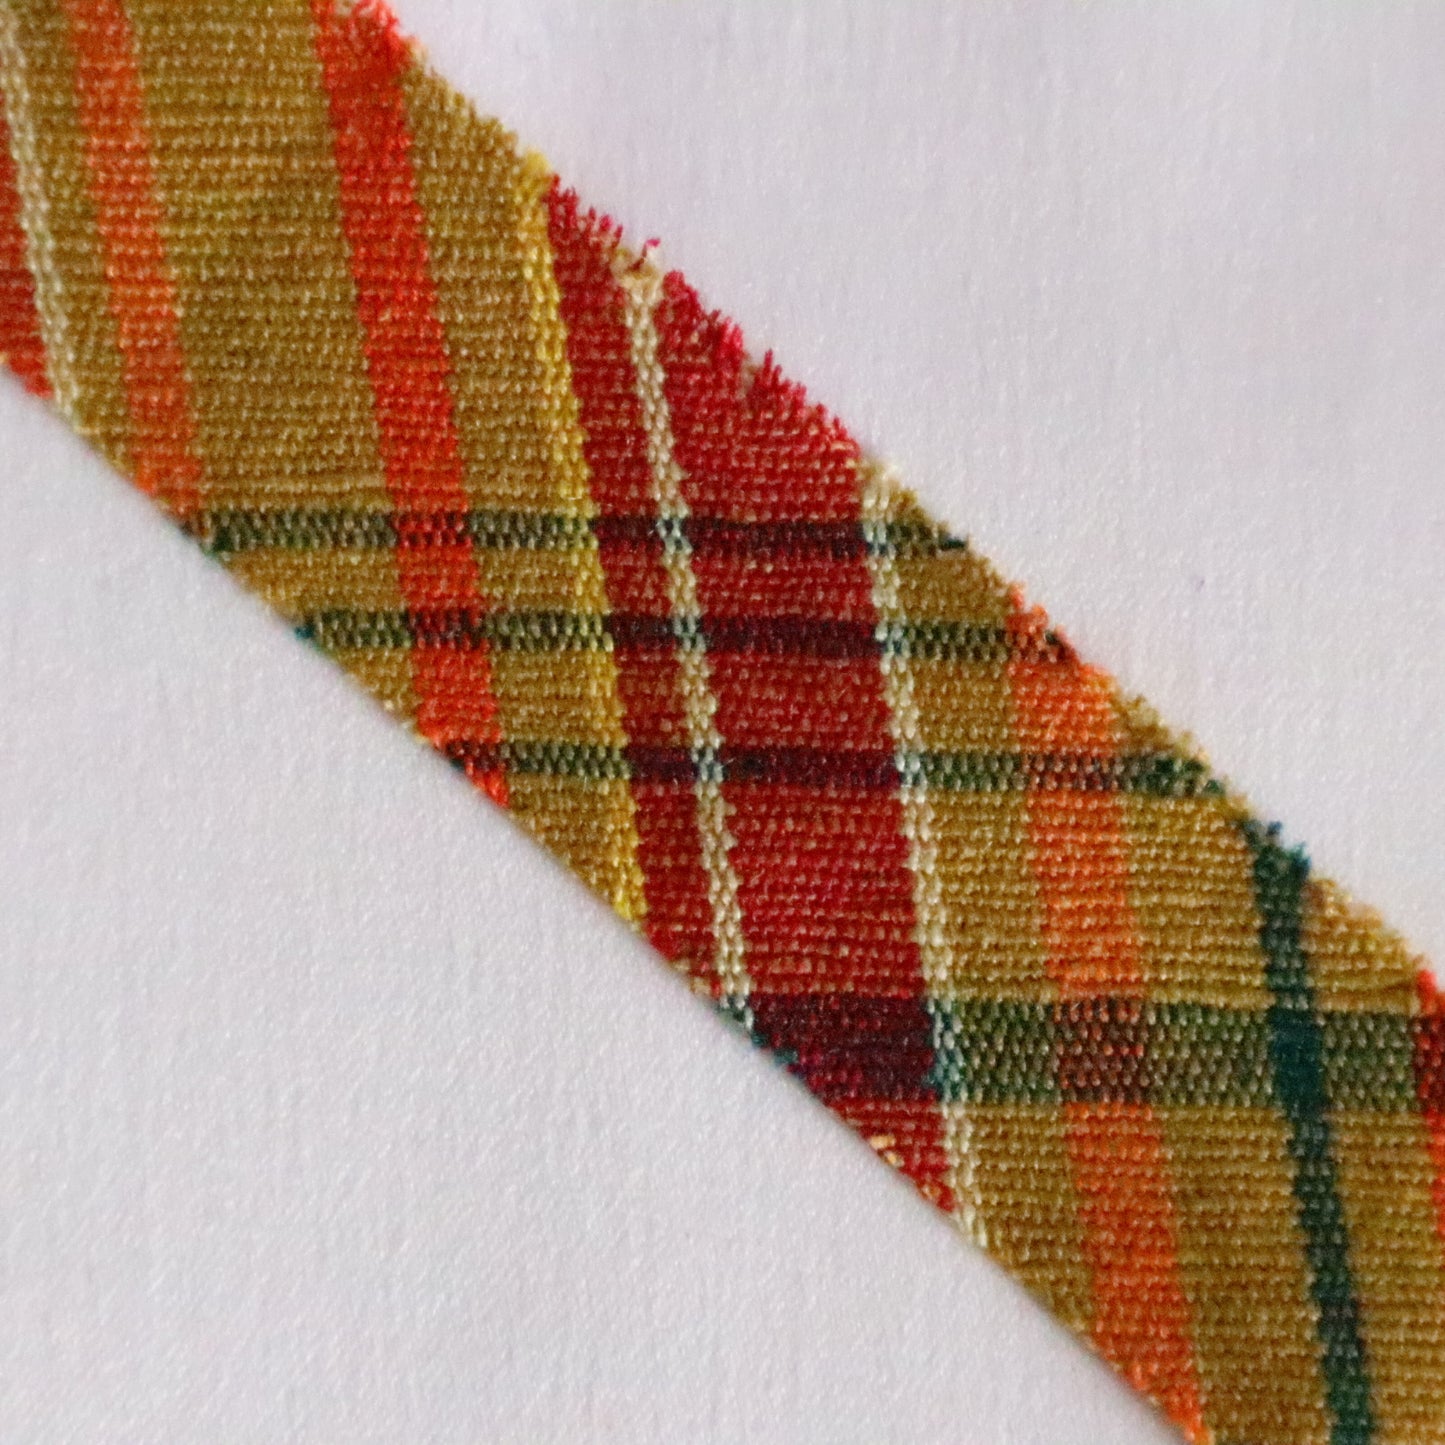 Ocher with green, red, brown, and yellow plaid pattern, pongee (Y02310014)